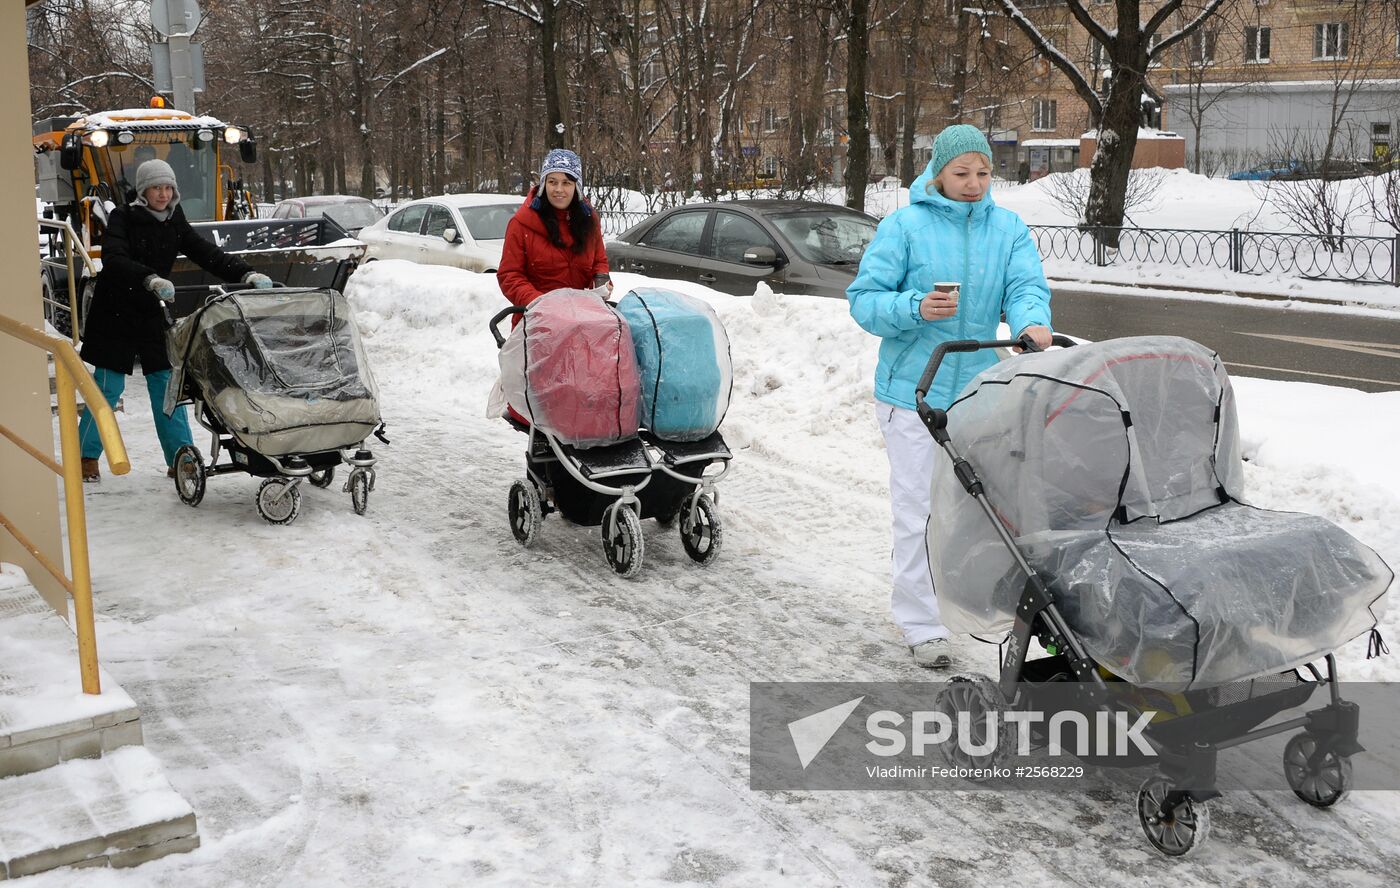 Women and children in Moscow streets